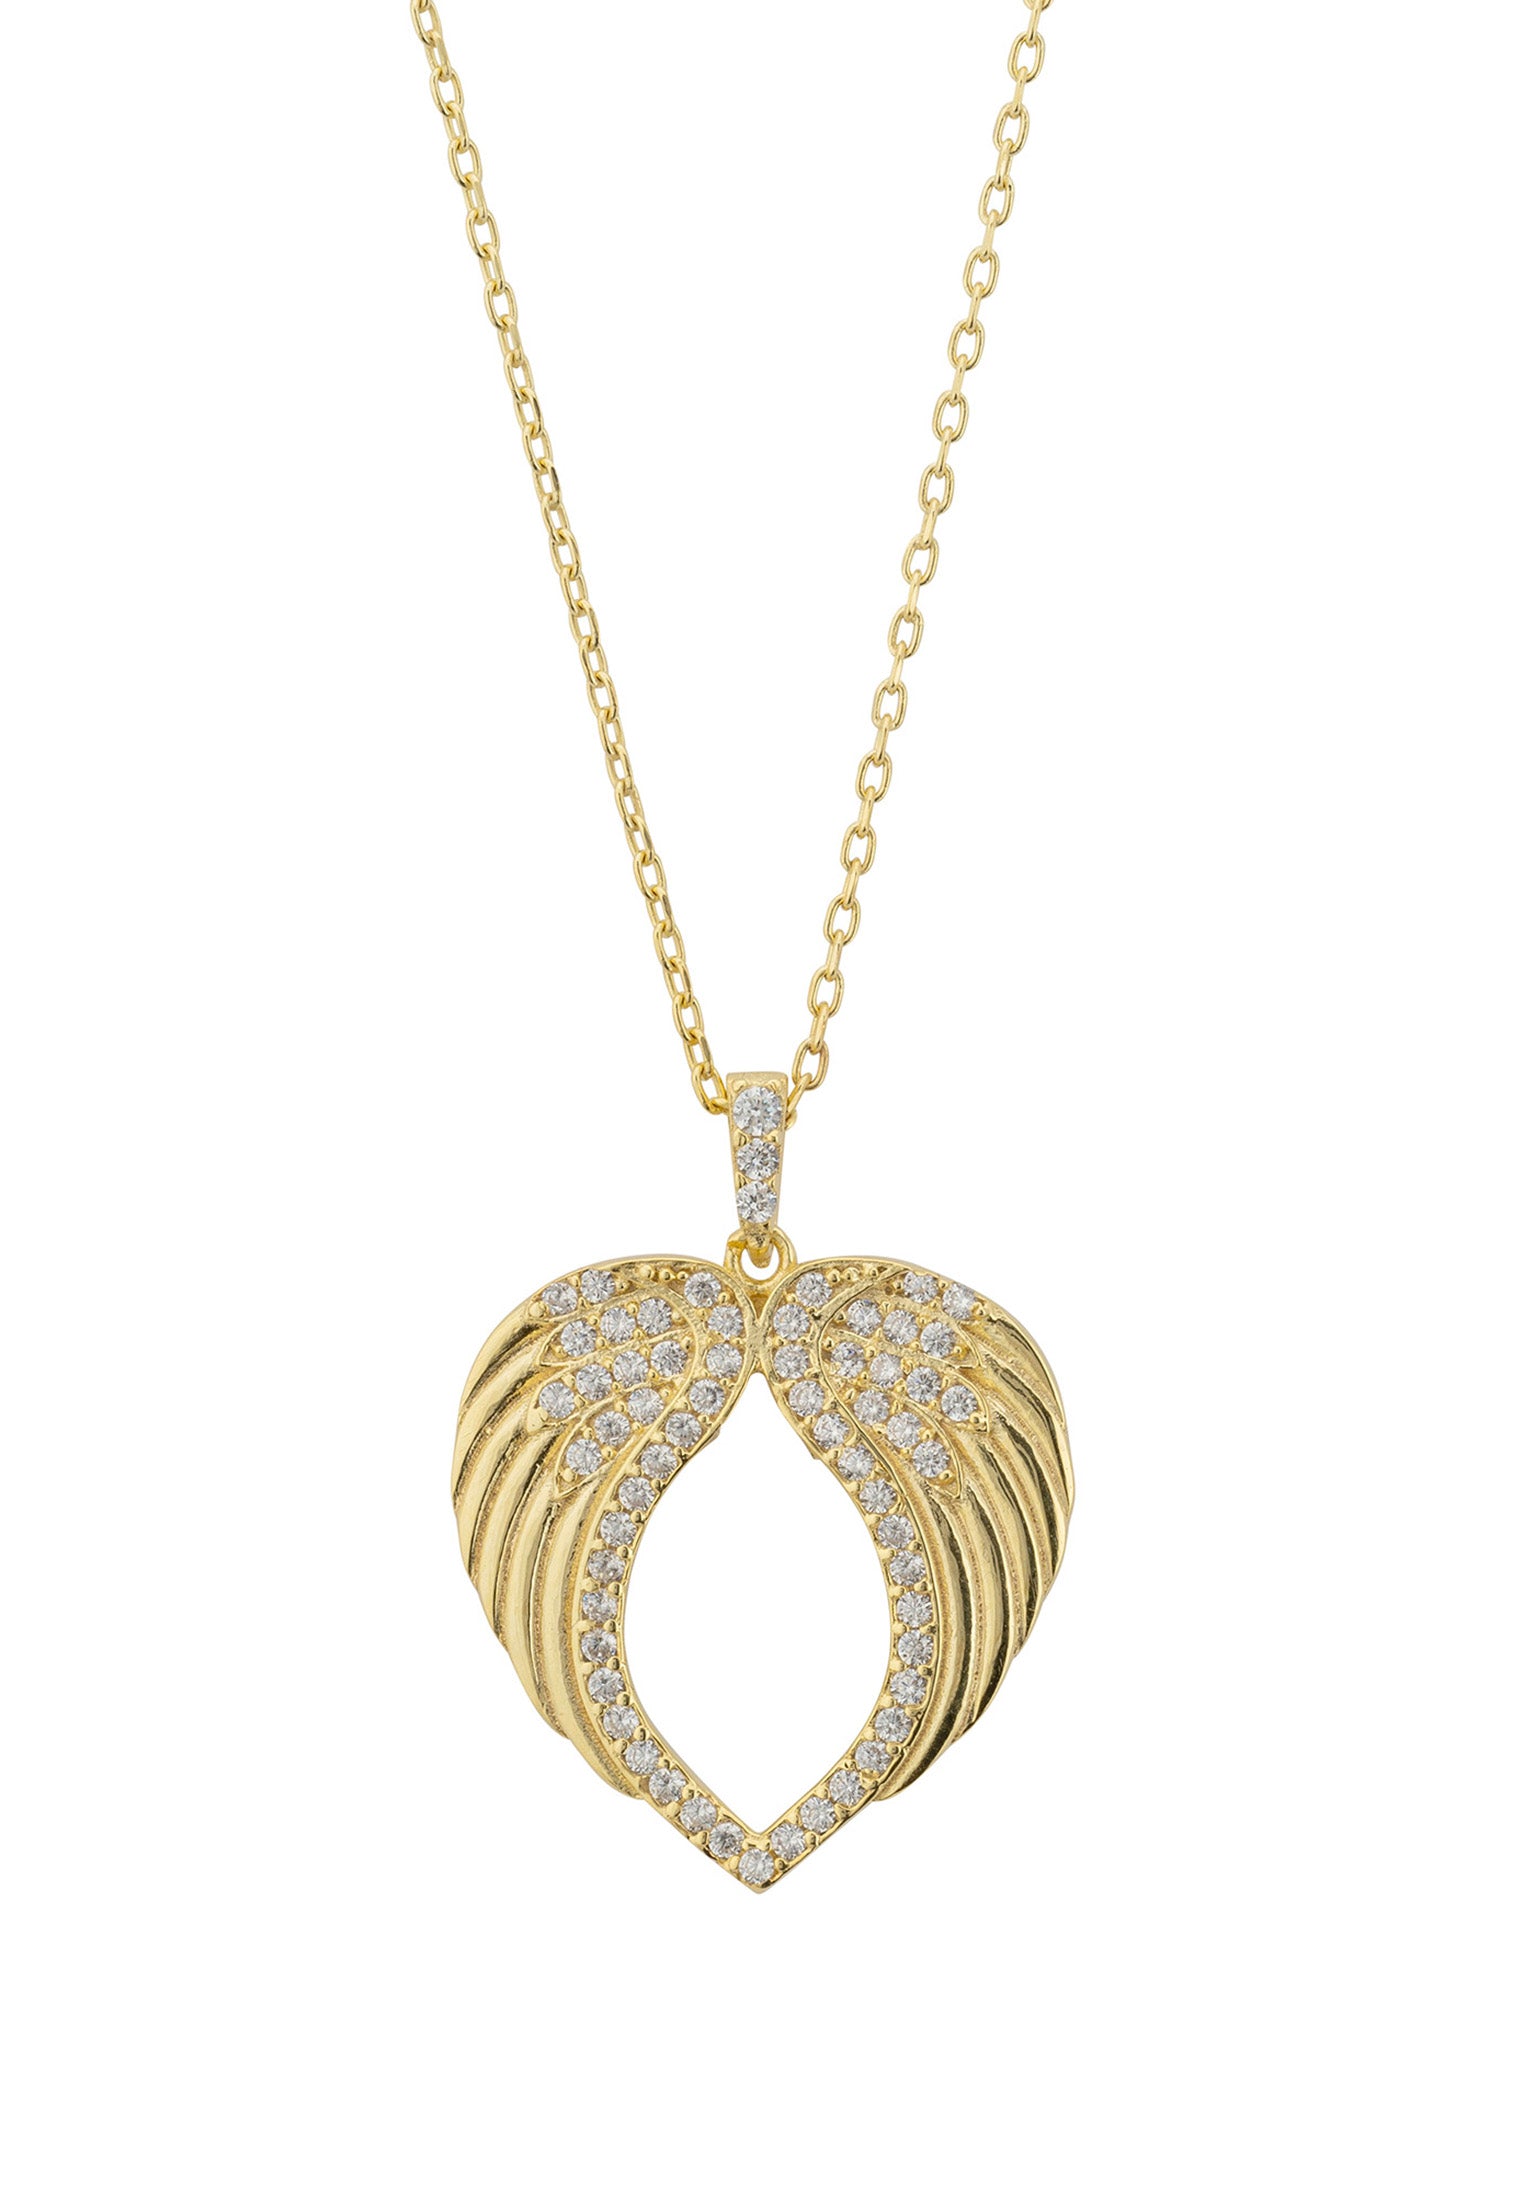 Protective Heart Angel Wing Pendant Necklace Gold